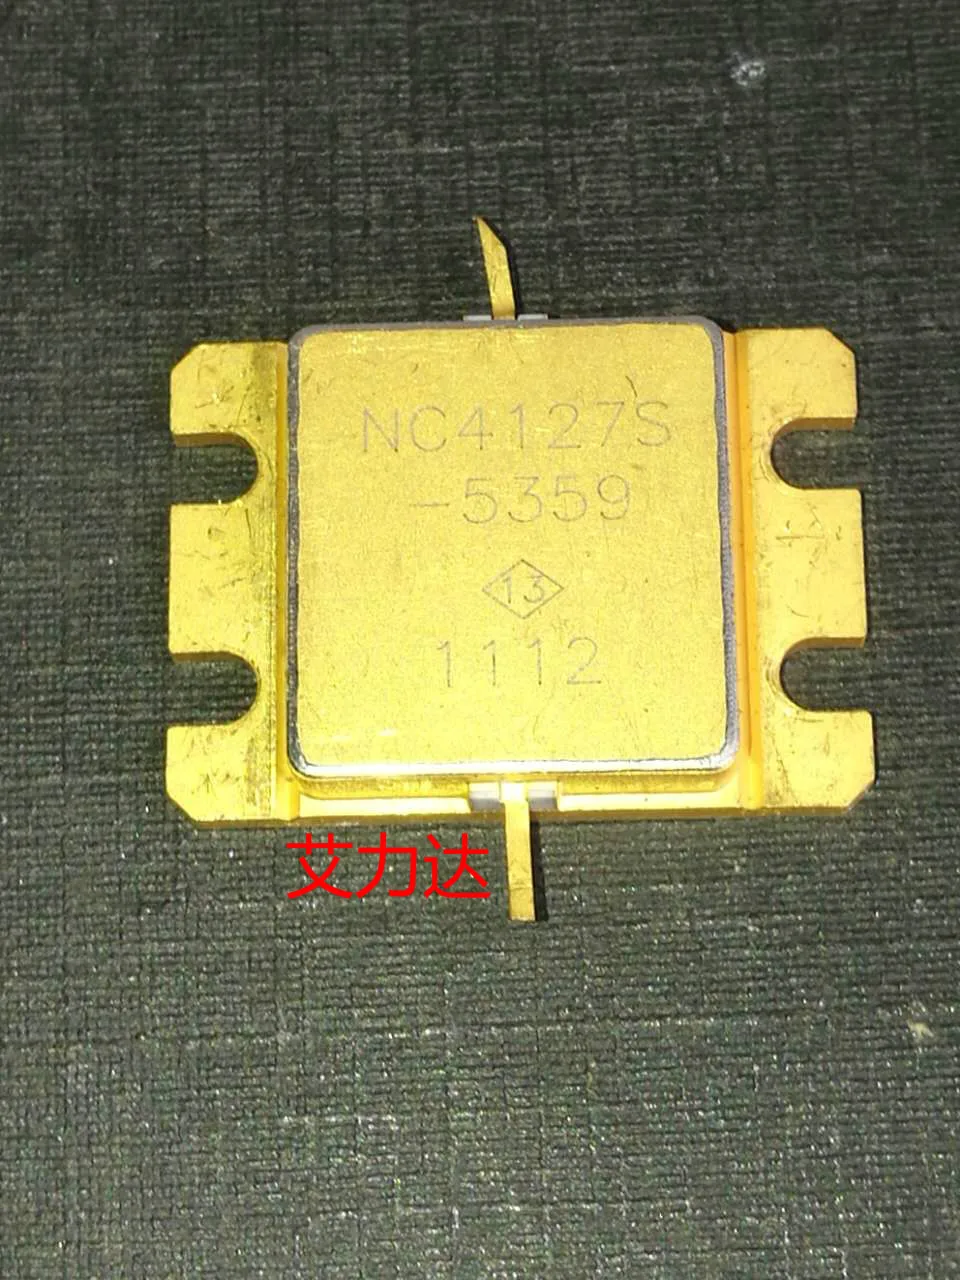 

FreeShipping NC4127S-5359 the same as TIM5359-45 Specialized in high frequency tube